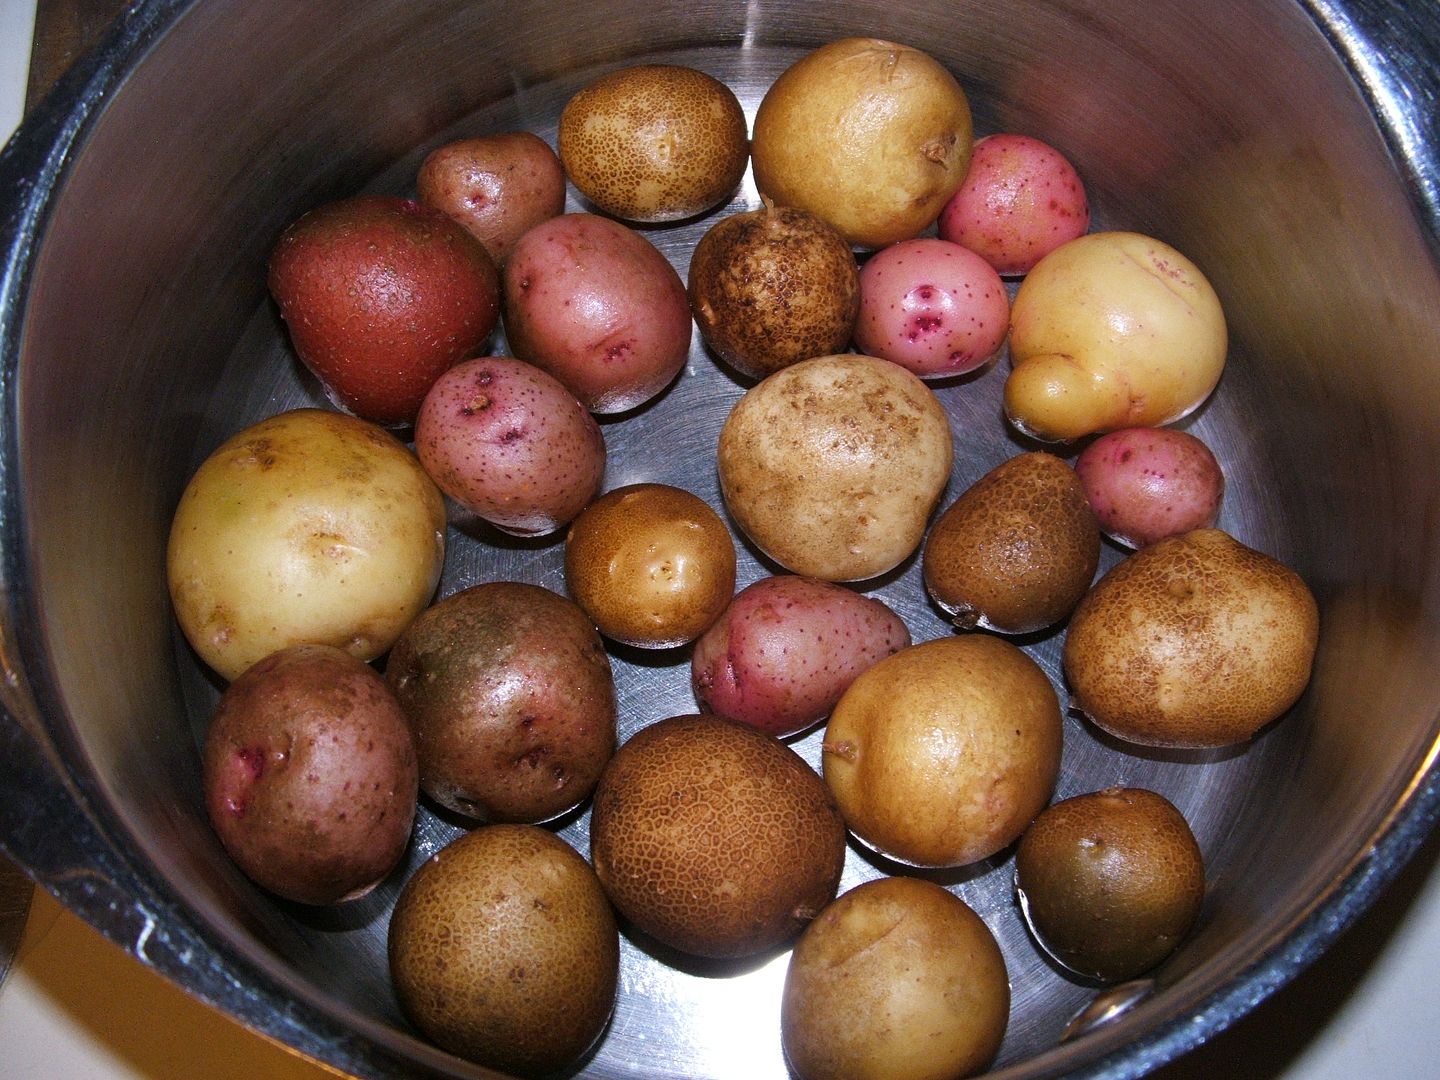 Tiny Tender Tater Treats by Angie Ouellette-Tower for godsgrowinggarden.com photo 001_zpsb231cdae.jpg